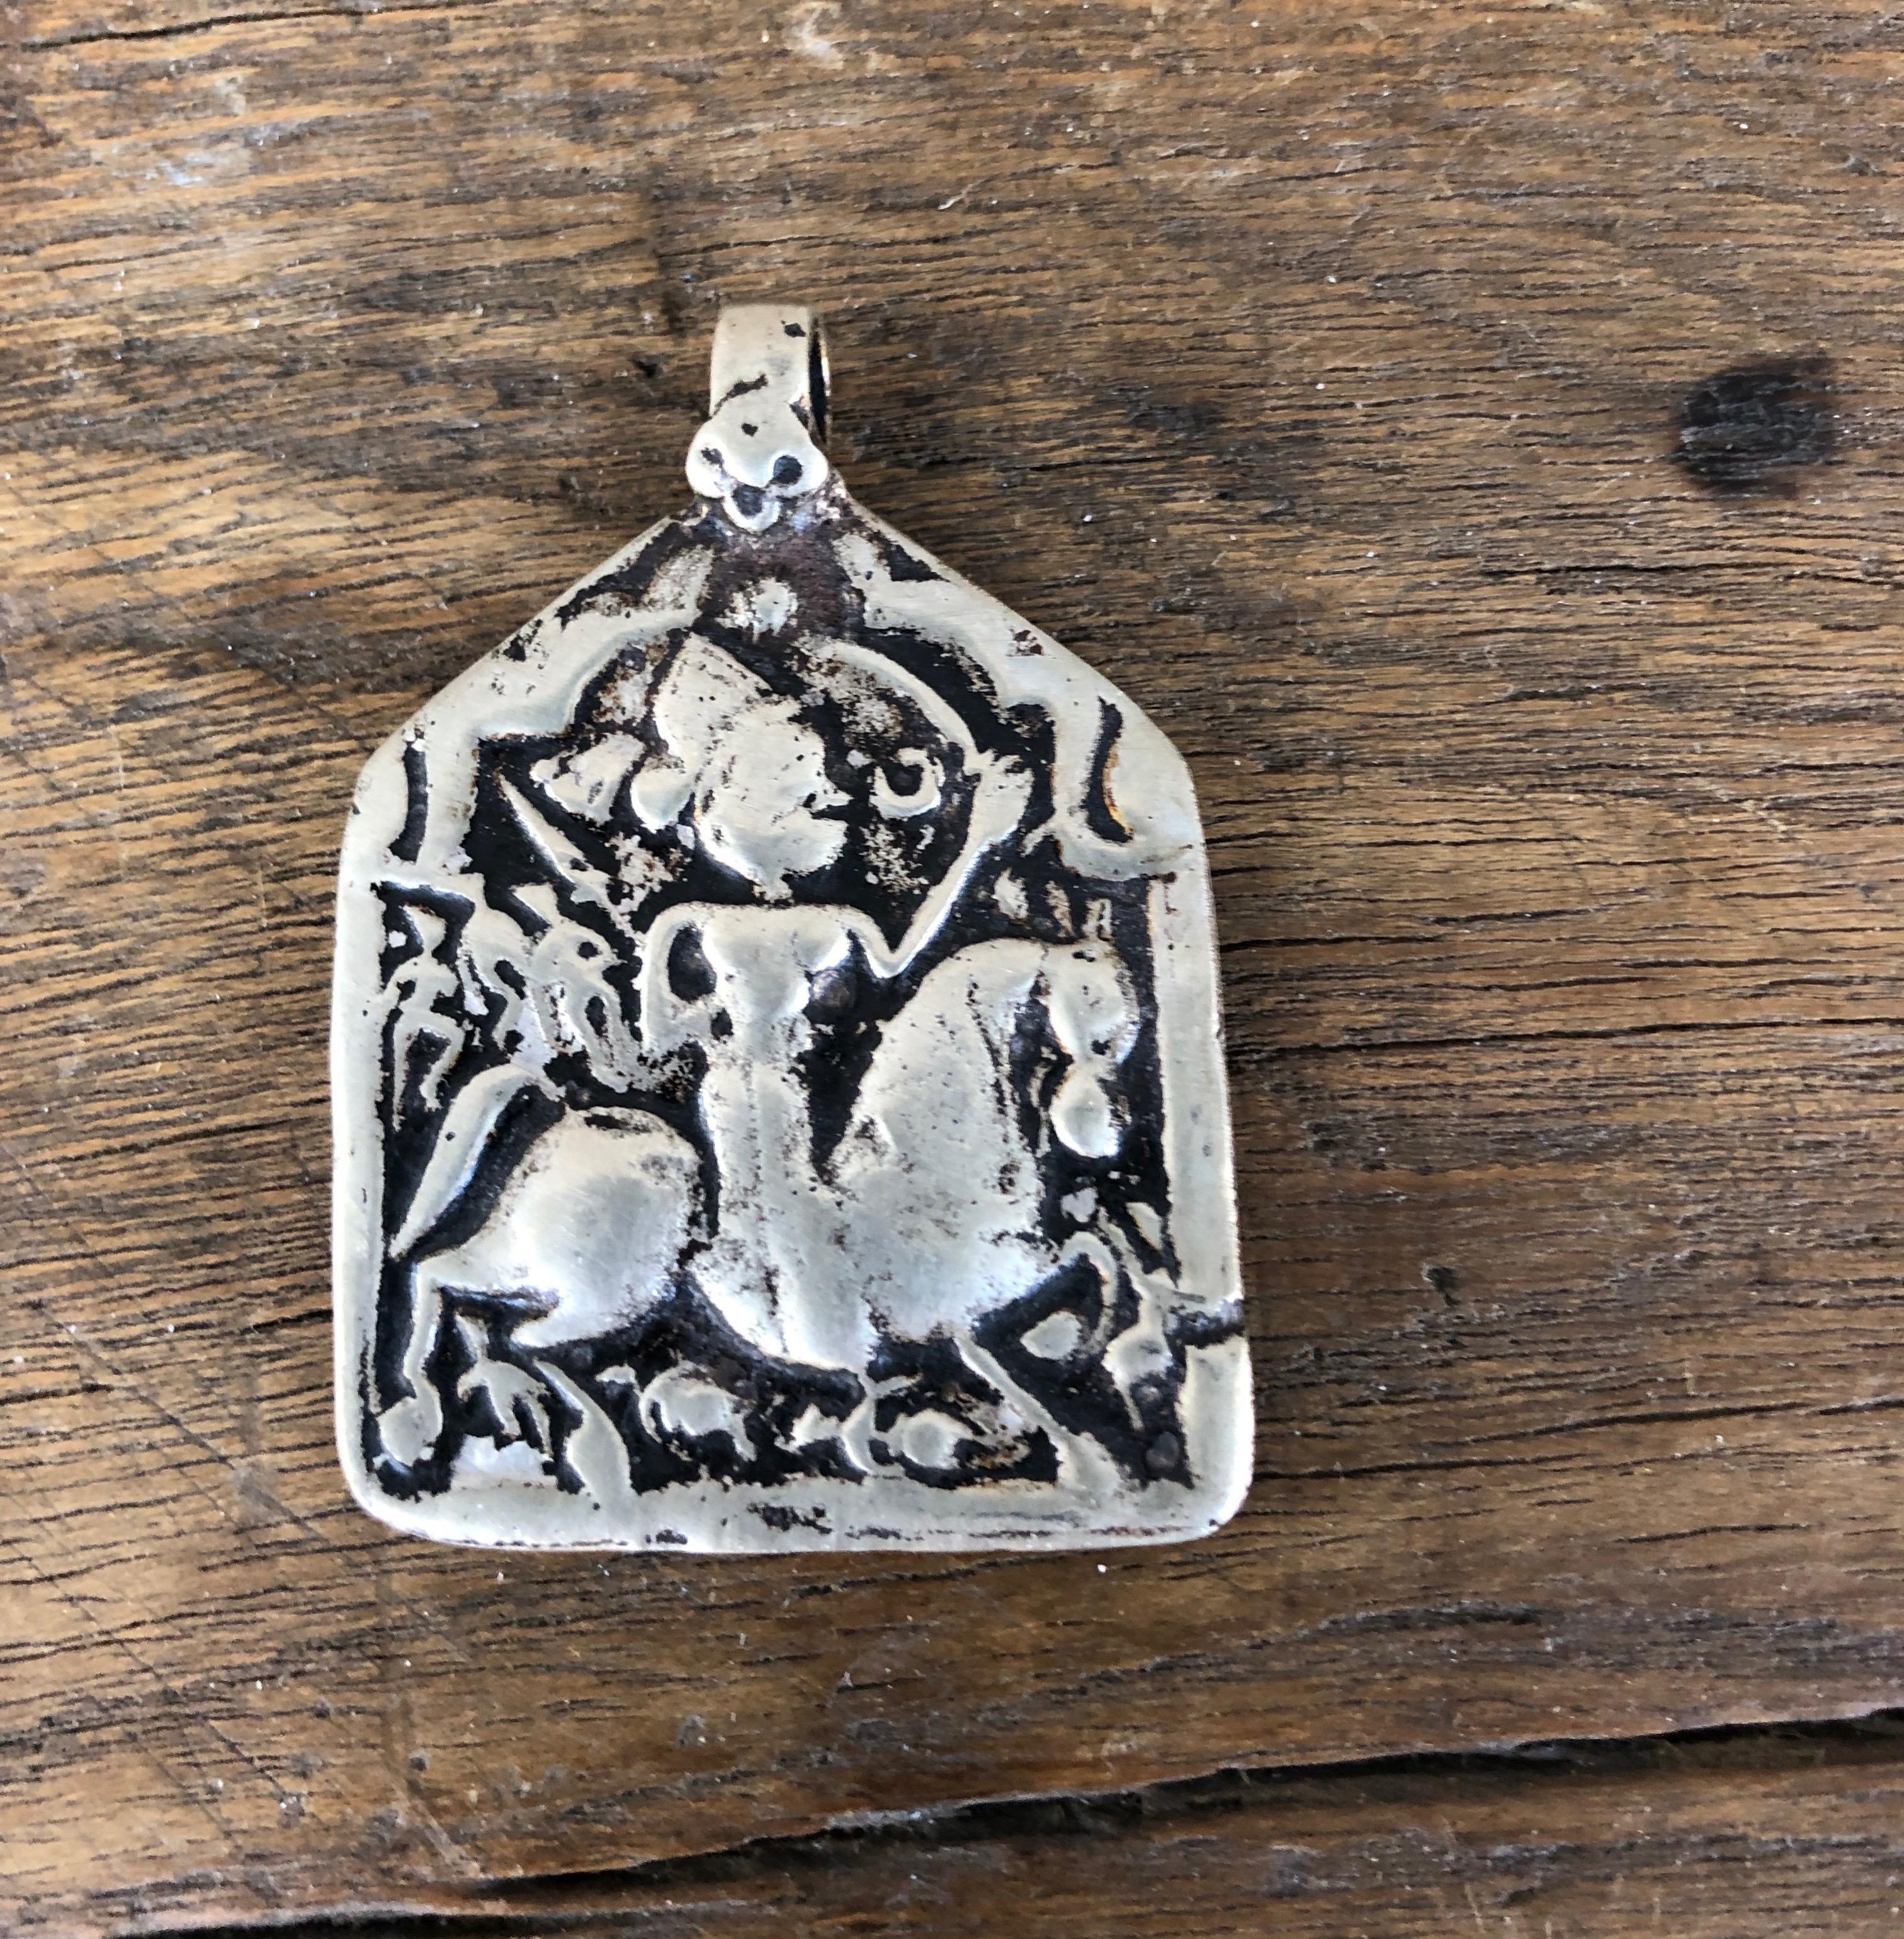 A stunning and rare 19th century amulet with detailed central imagery of a man astride a horse. This piece, from India, conveys it's age and history through the gorgeous patina created over several generations. Worn with a simple leather cord or